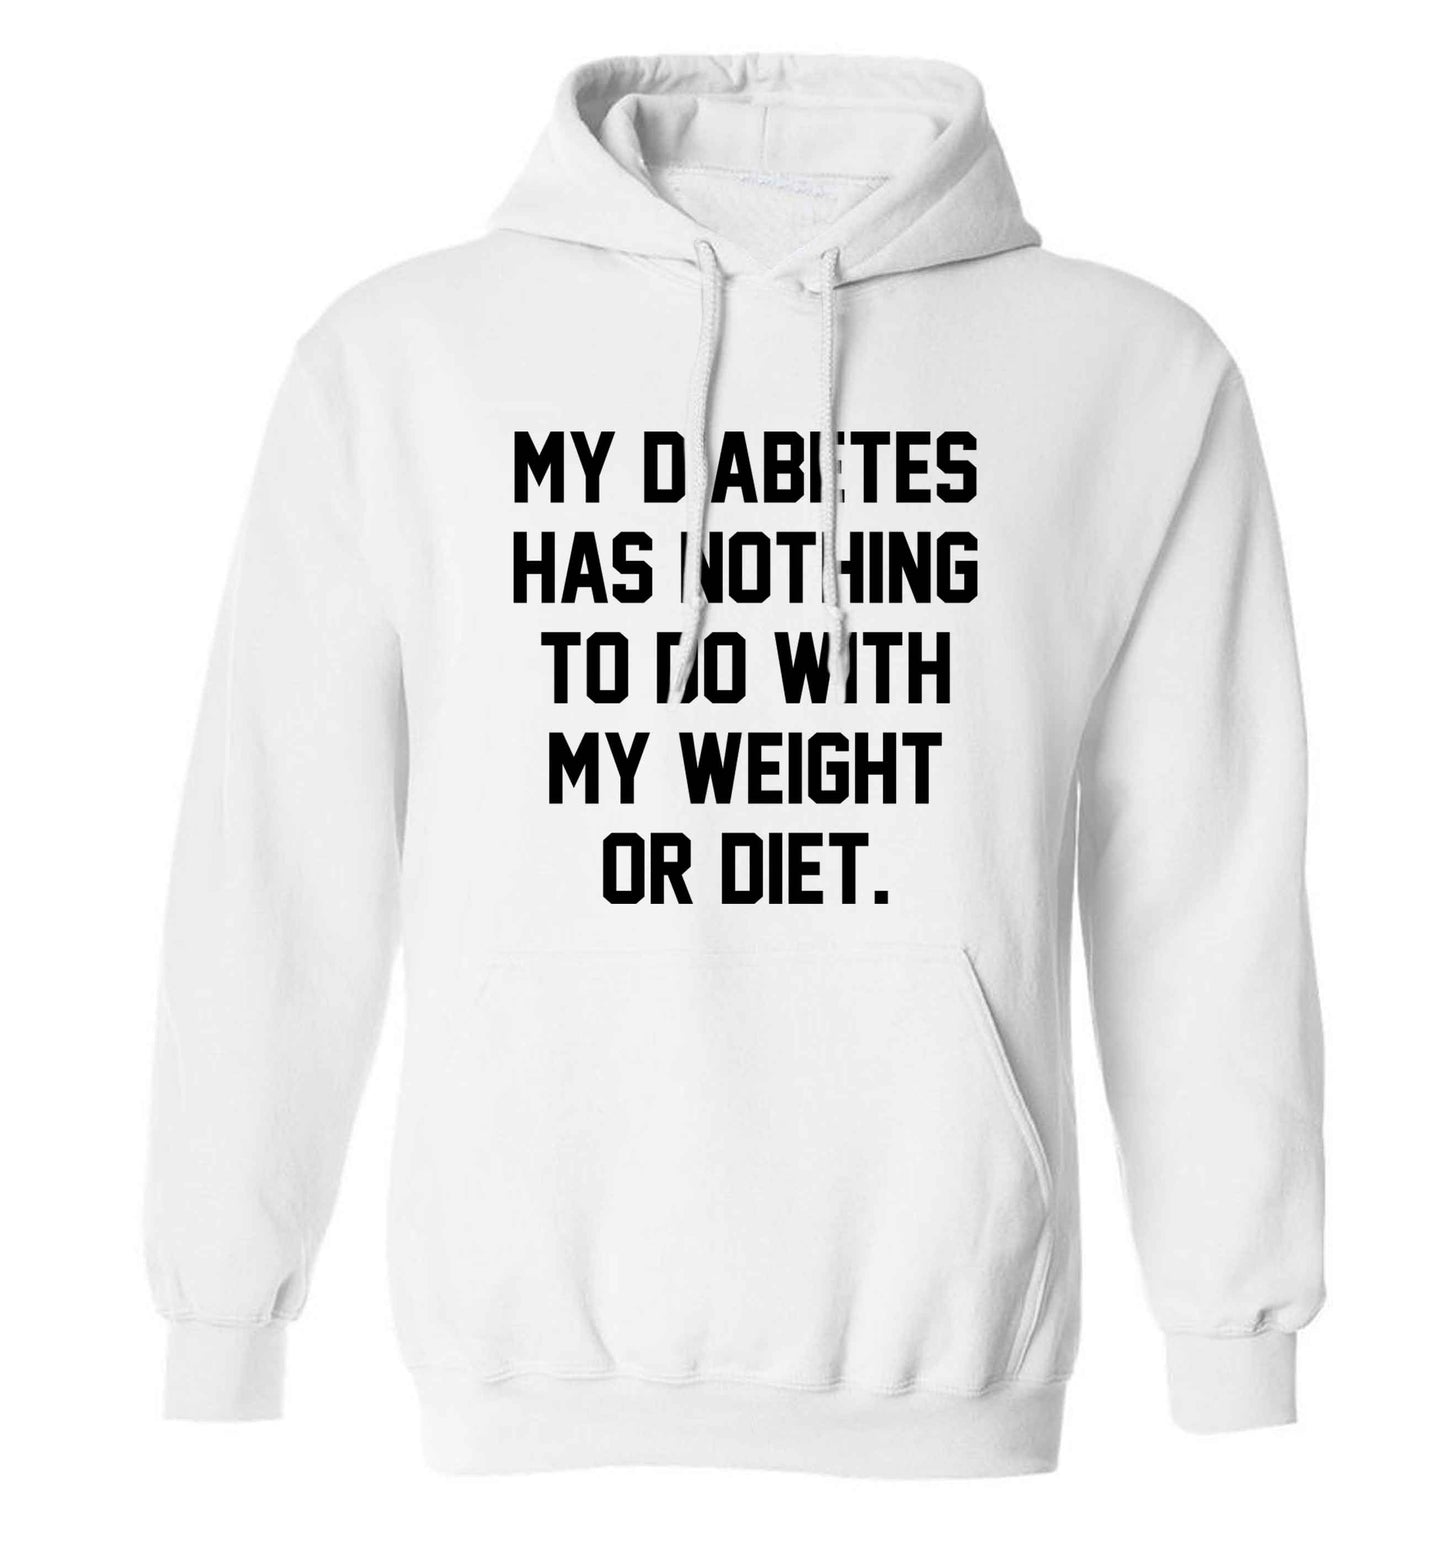 My diabetes has nothing to do with my weight or diet adults unisex white hoodie 2XL